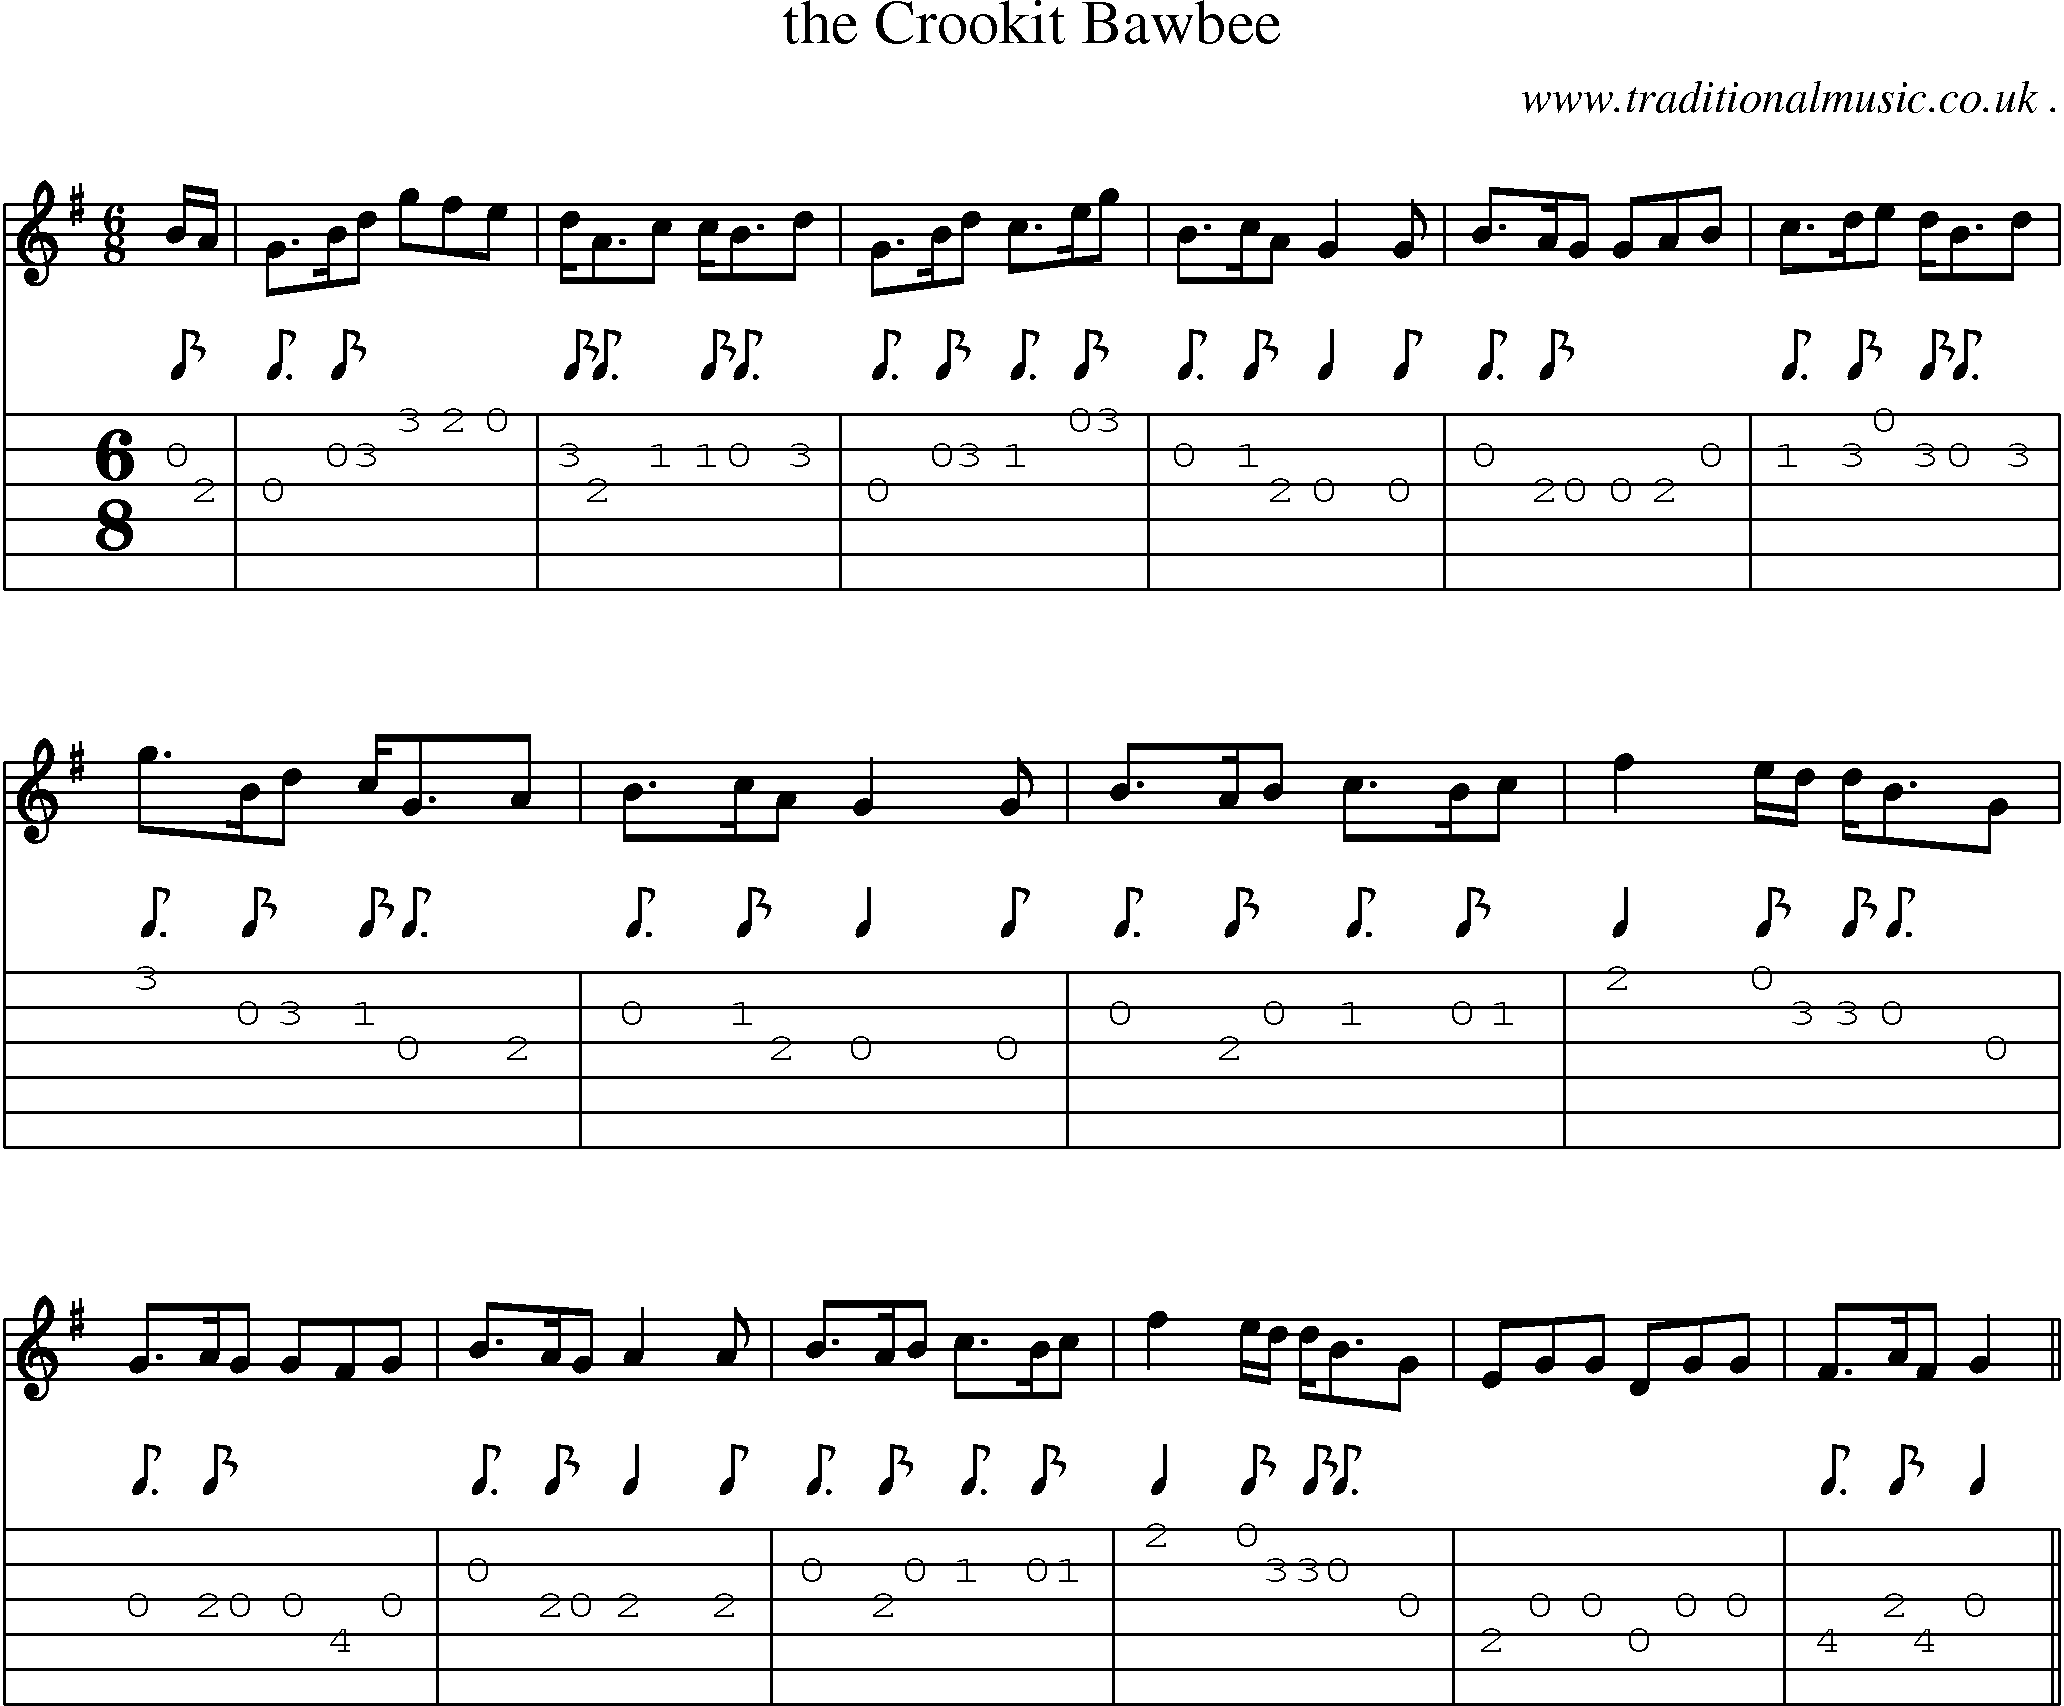 Sheet-Music and Guitar Tabs for The Crookit Bawbee